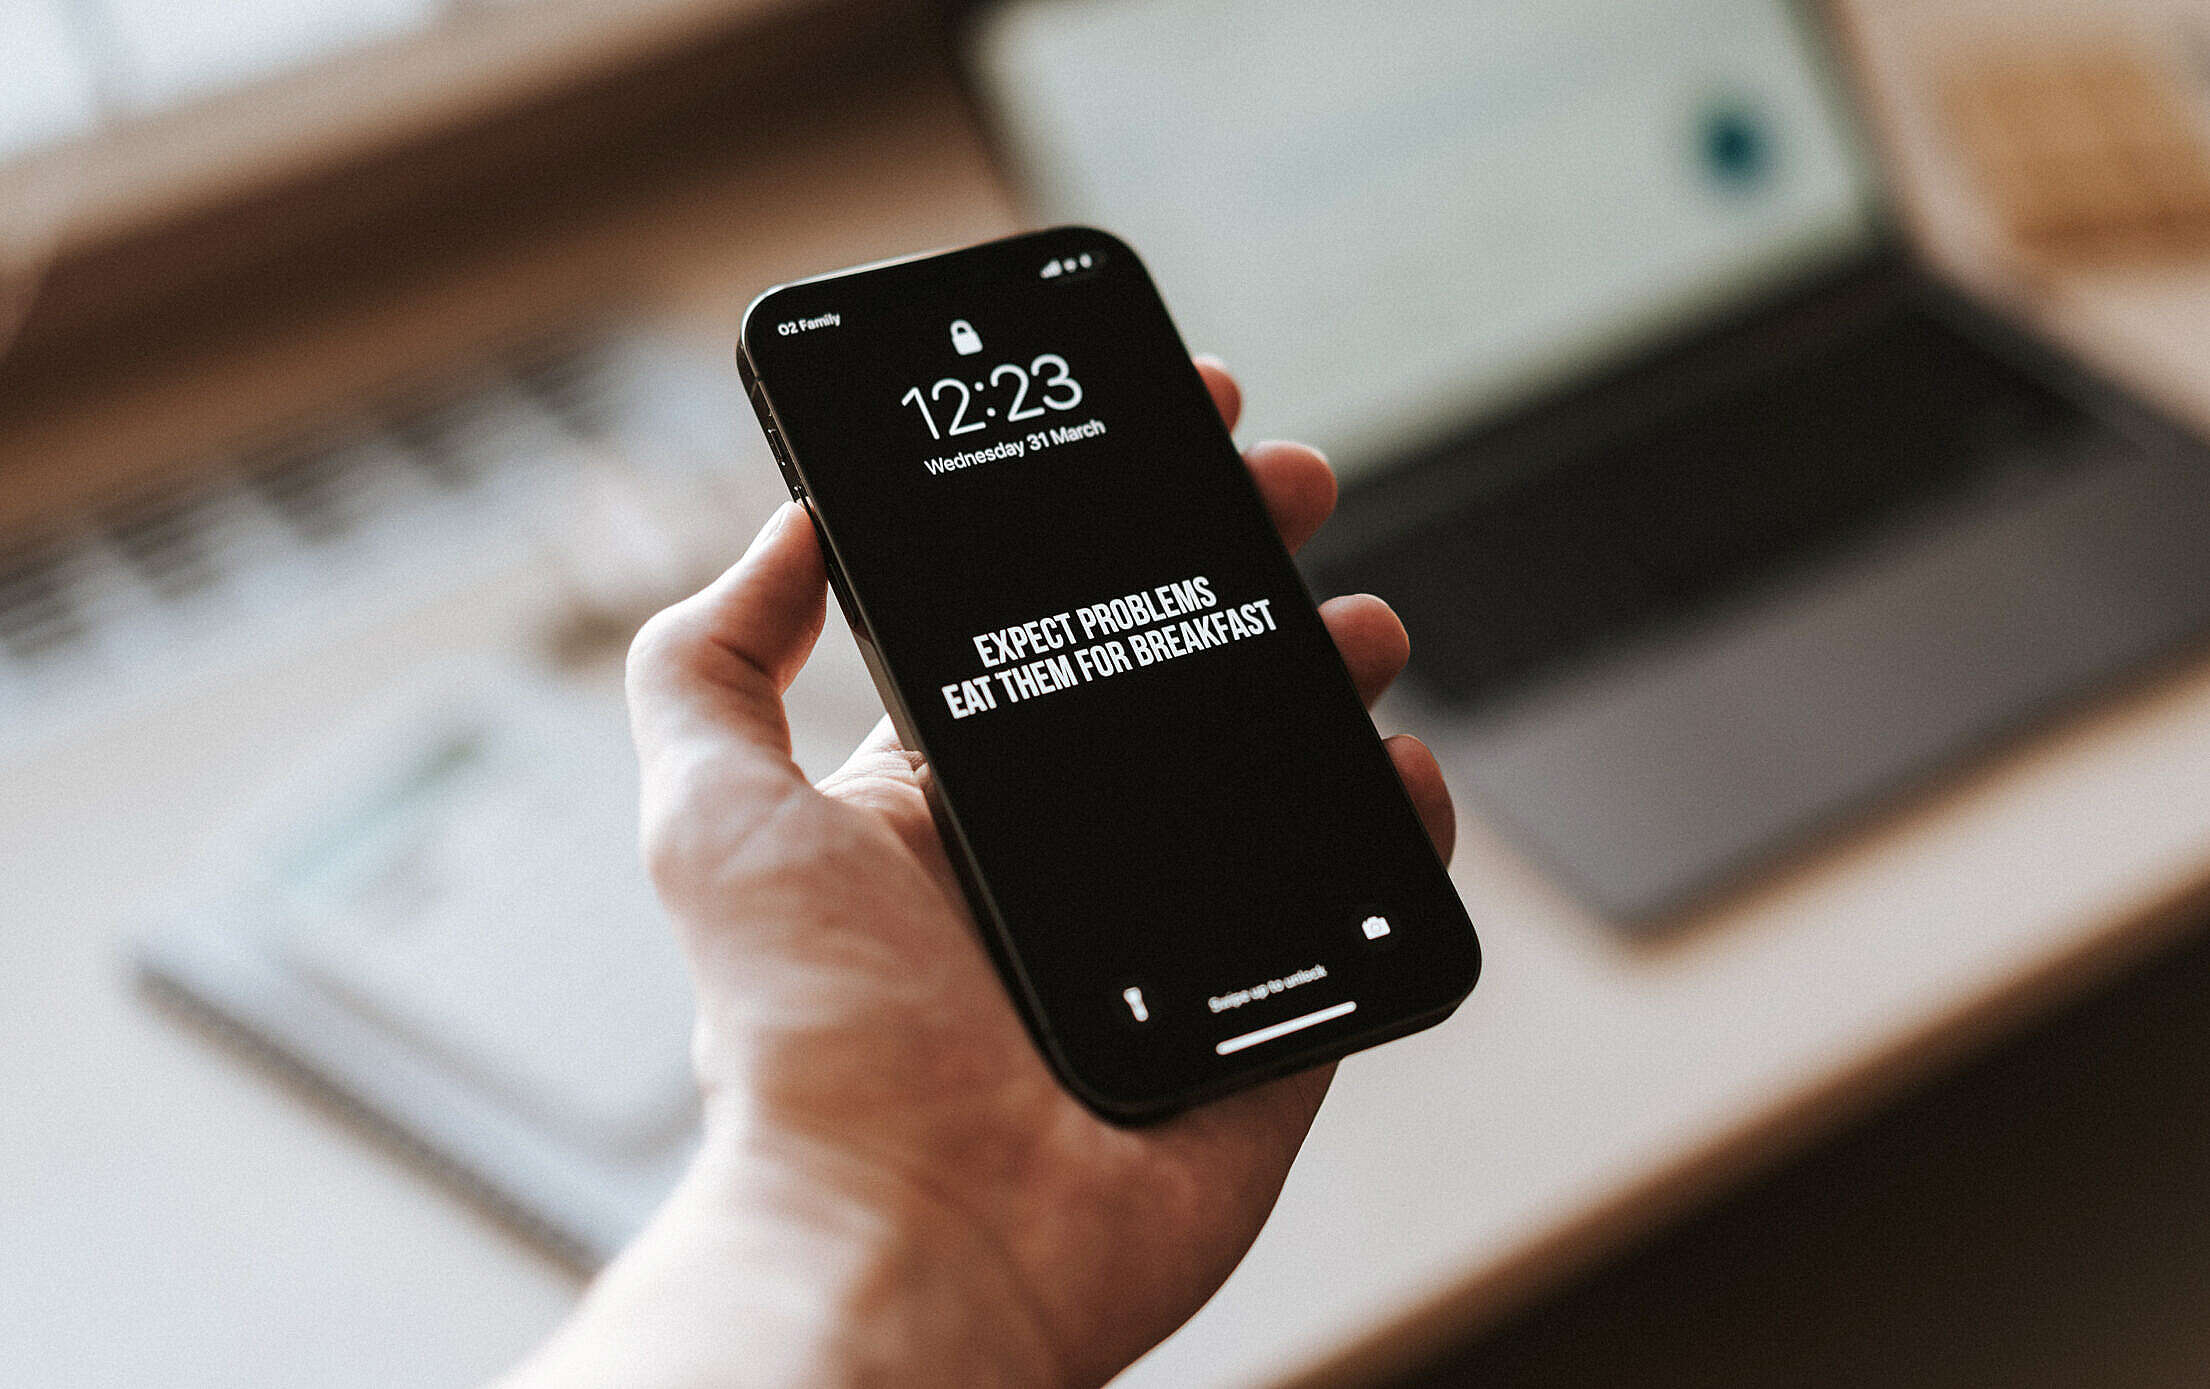 Motivation Wallpaper on a Smartphone Free Stock Photo